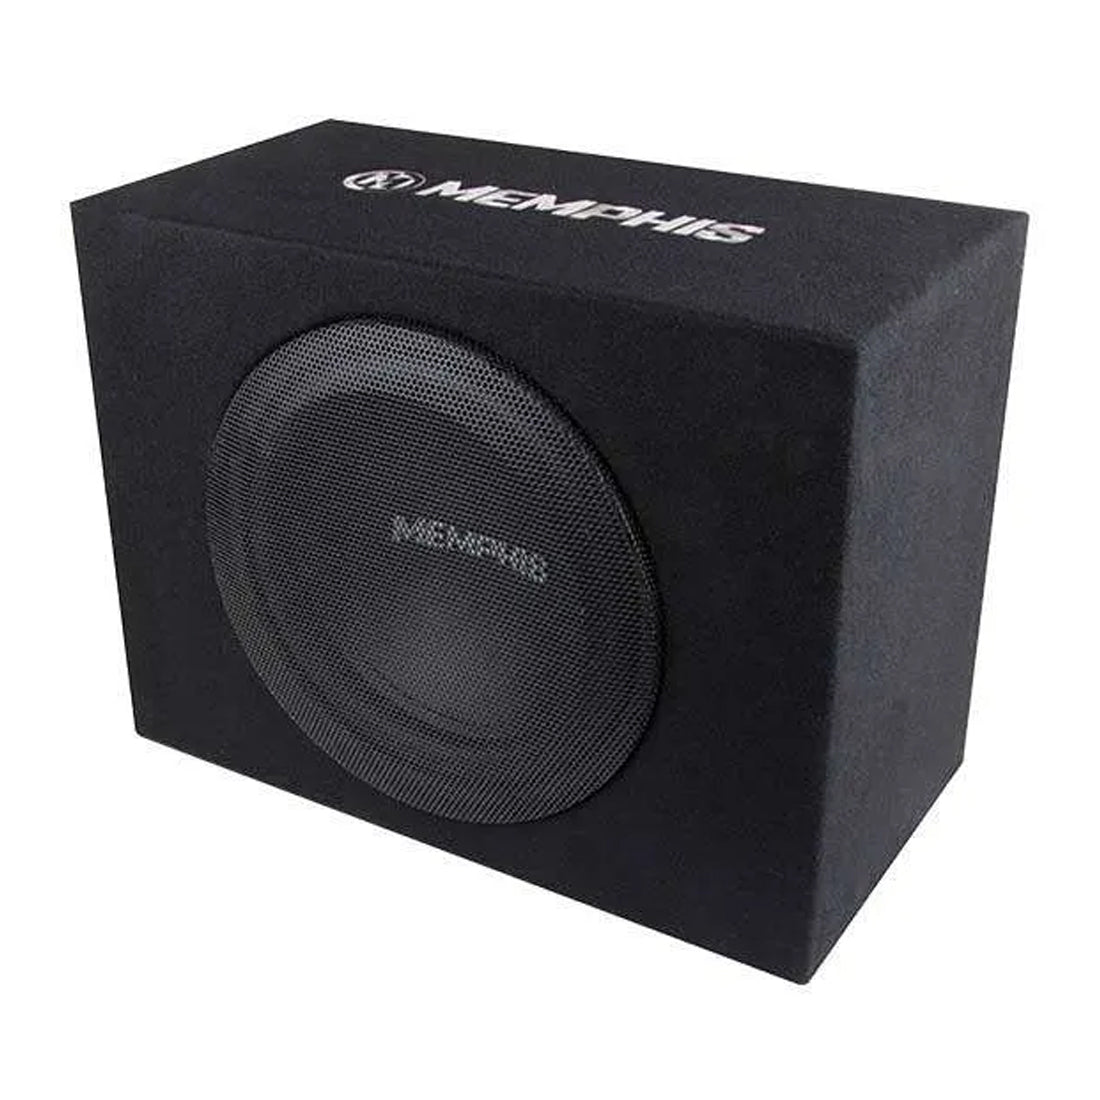 Memphis Audio SRX12SP Street Reference 12" Loaded Amplified Subwoofer Enclosure